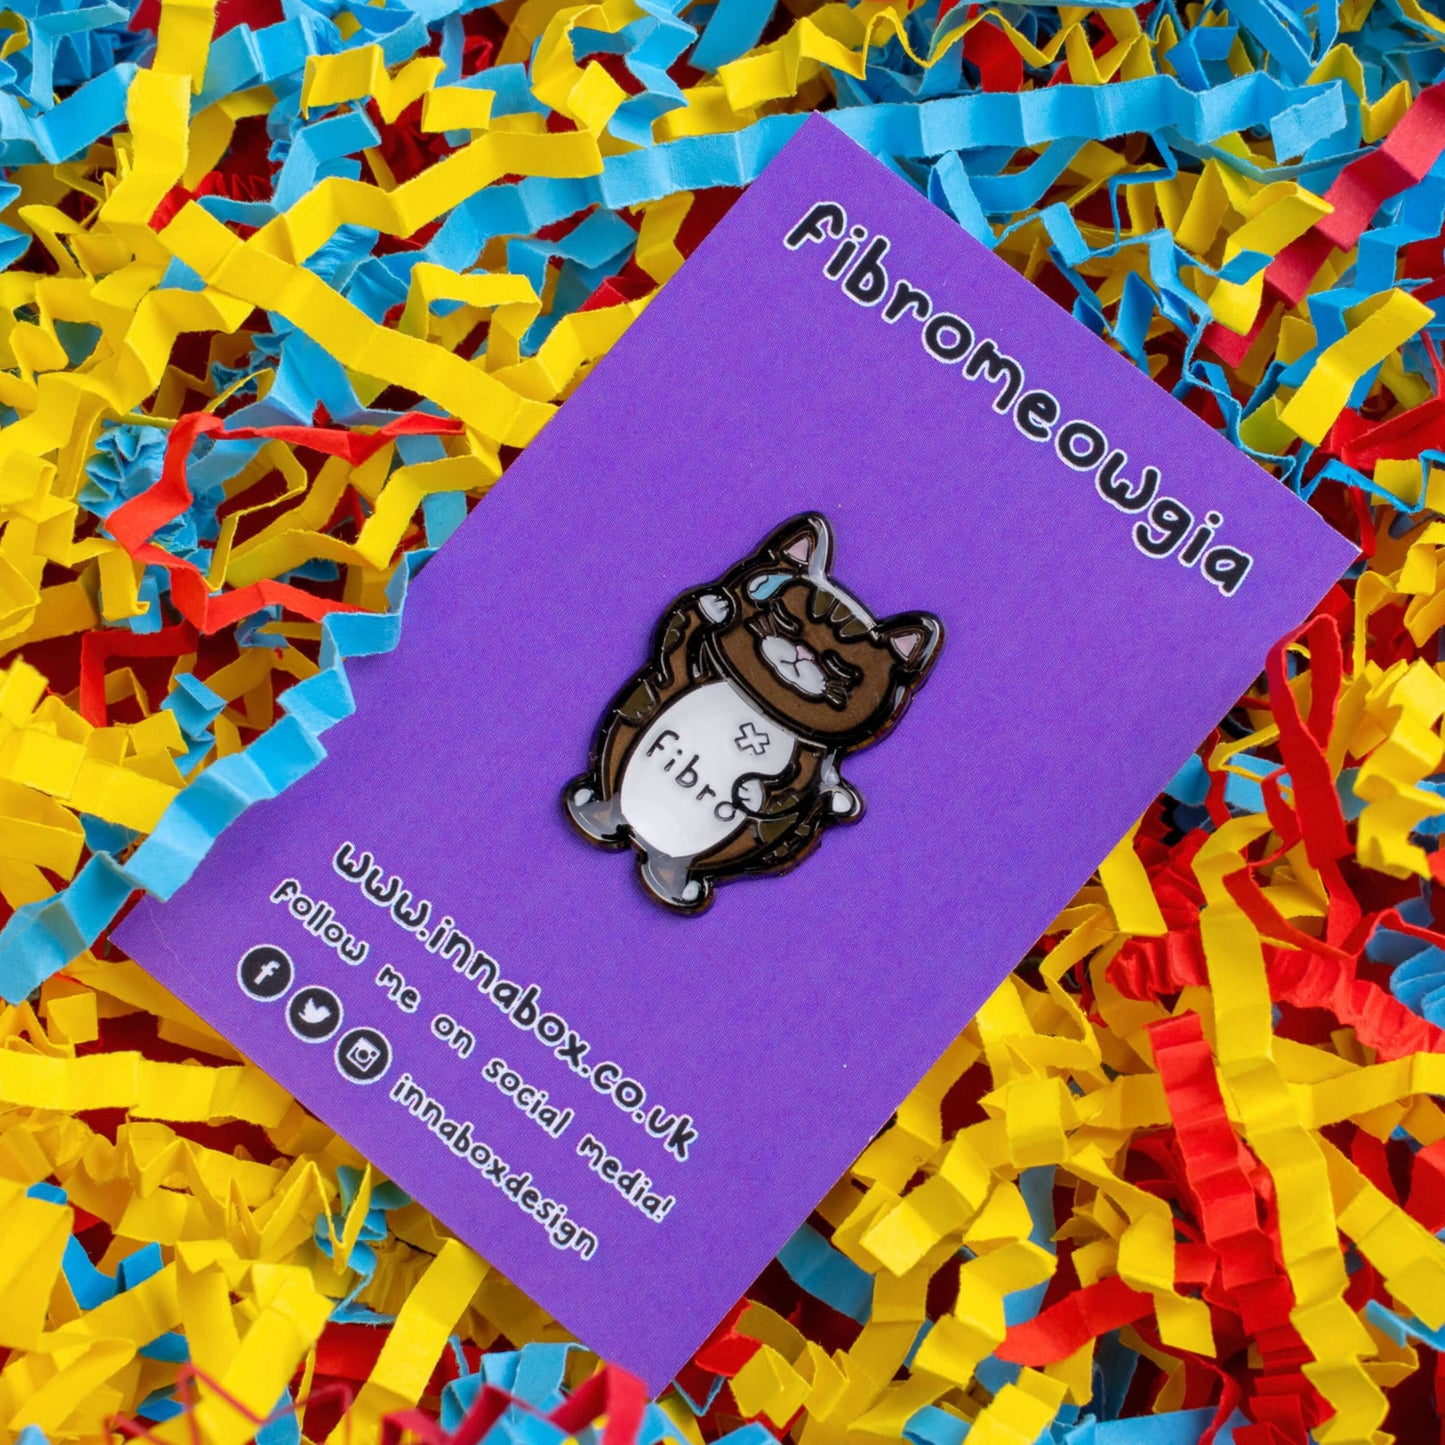 Fibromeowgia Enamel Pin - Fibromyalgia on purple backing card laid on a red, yellow and blue card confetti background. The enamel pin is a brown cat with a white stomach with fibro written across it. The cat has its eyes closed, a sweat droplet on its forehead and holding its head in its paw. The enamel pin is designed to raise awareness for fibromyalgia.